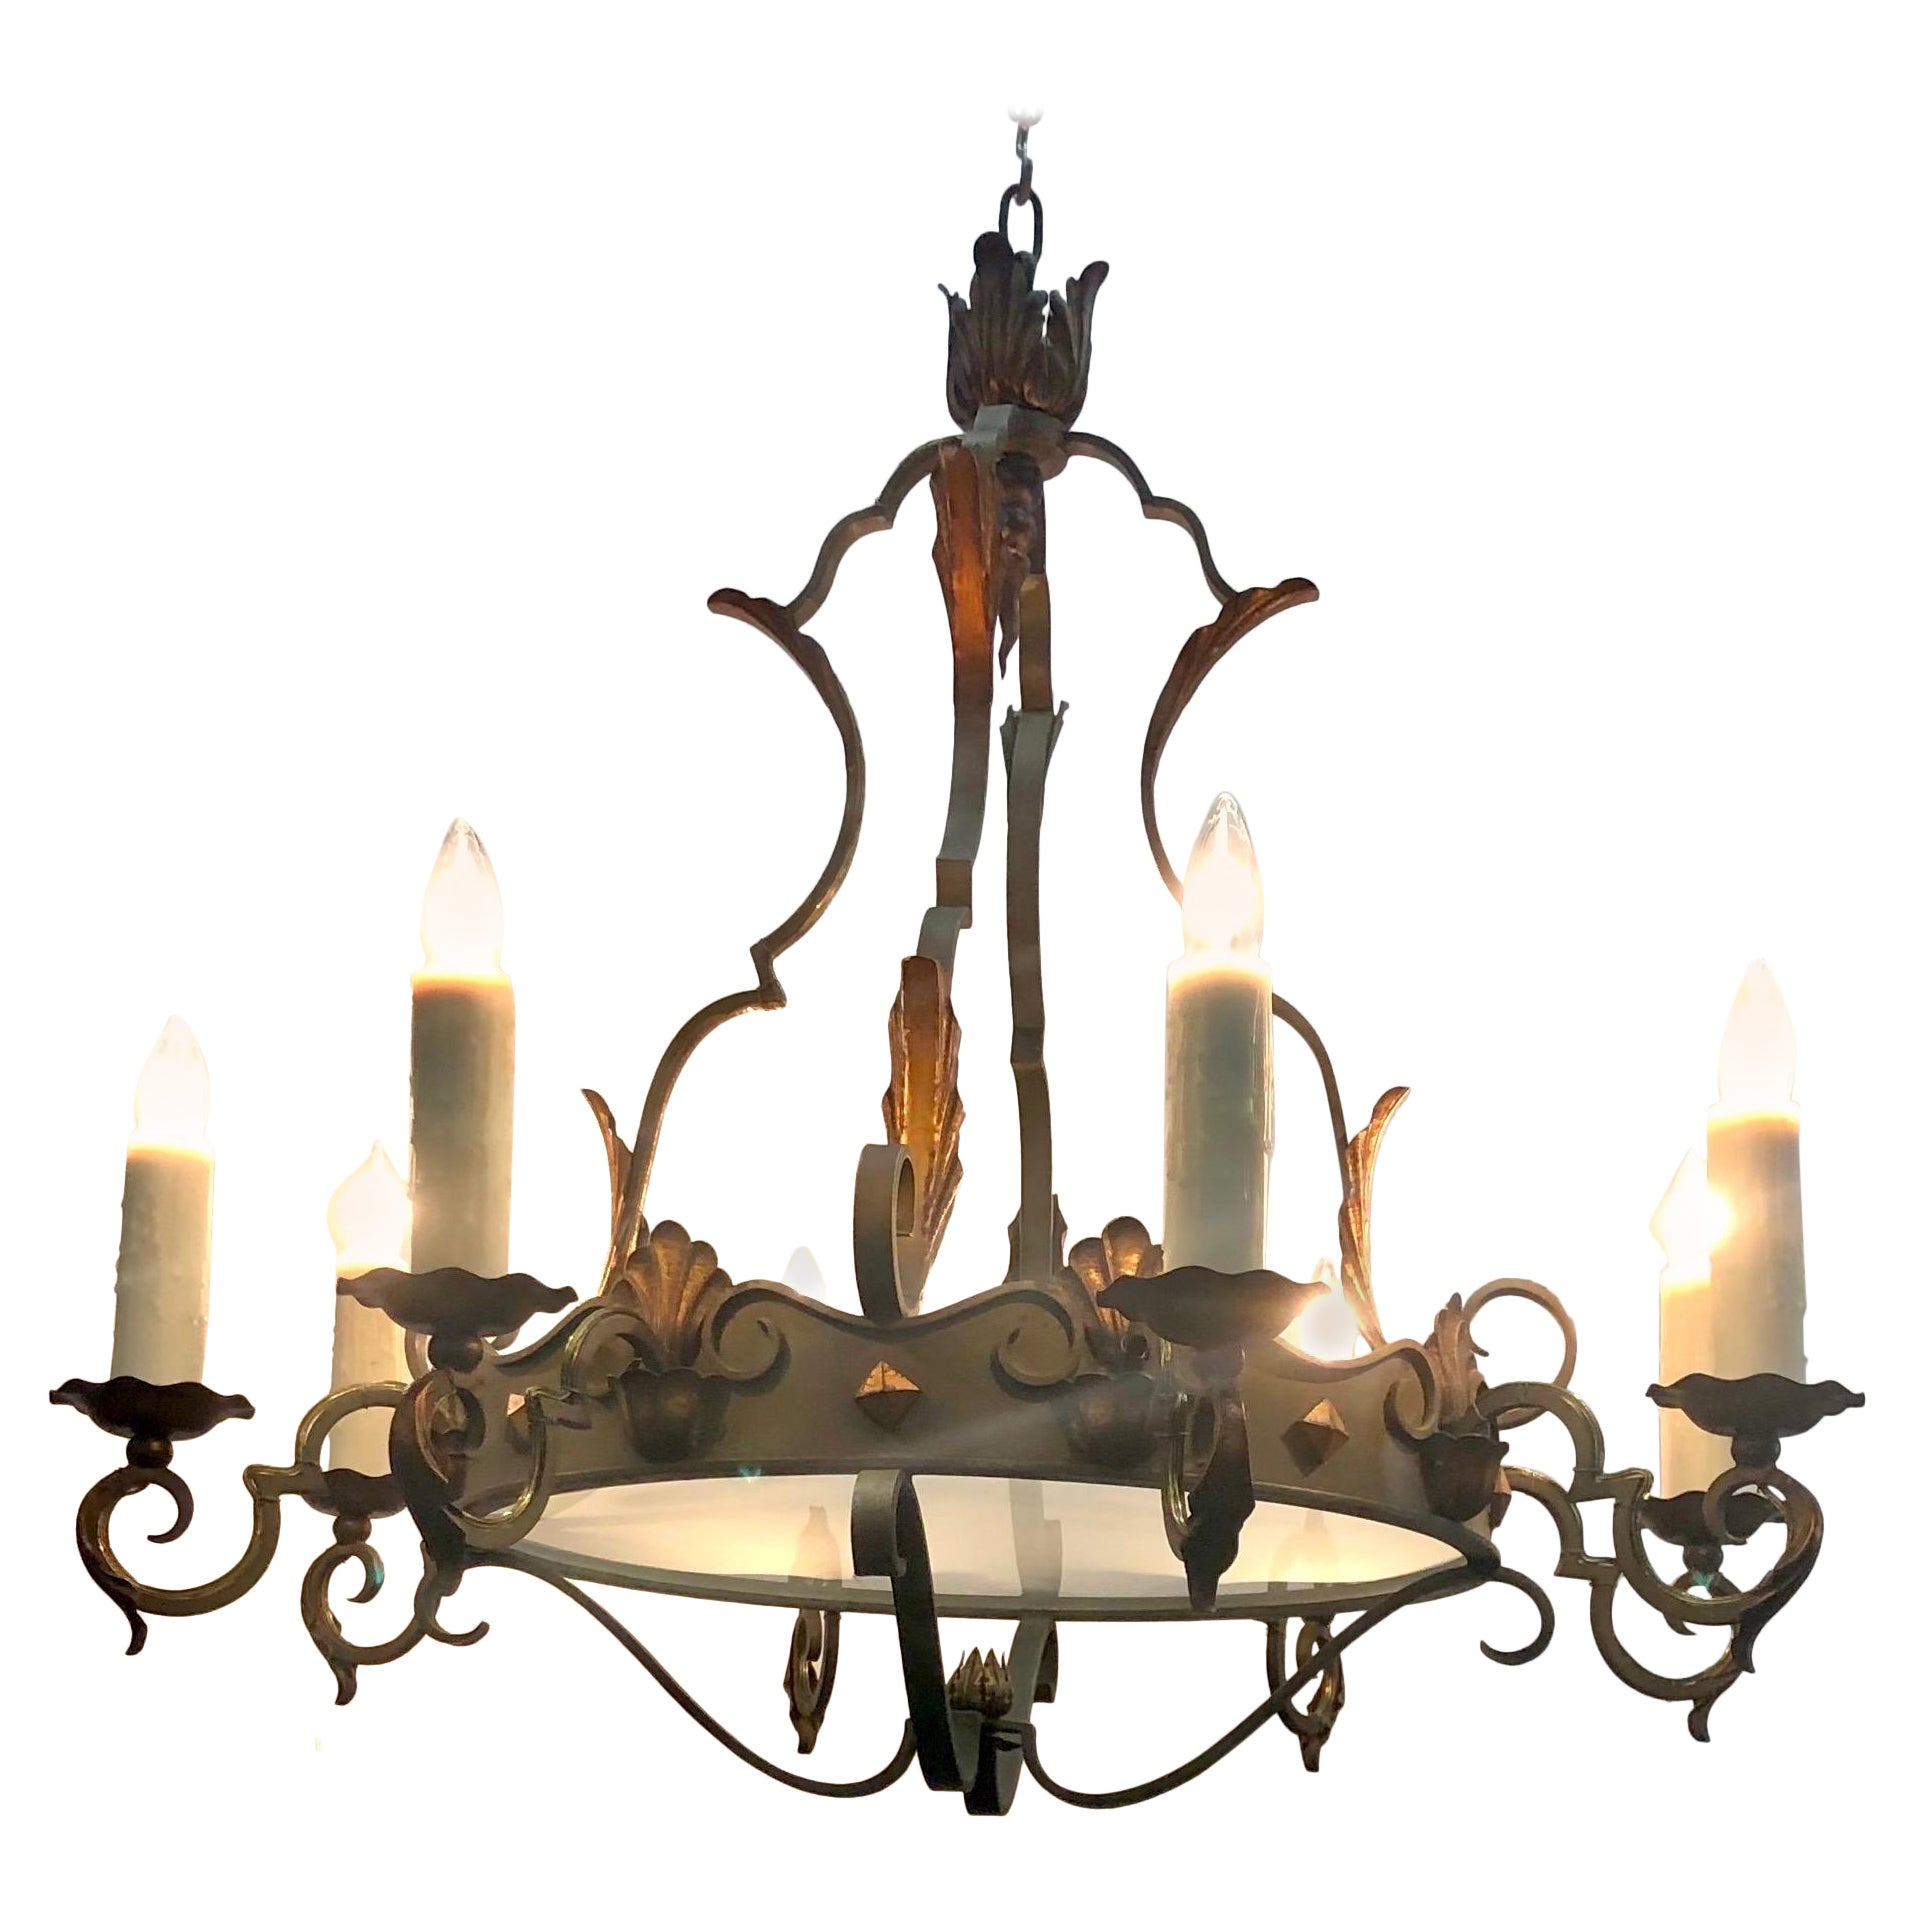 Régence Style French  Tôle  & Wrought Iron Chandelier, Early 20th Century